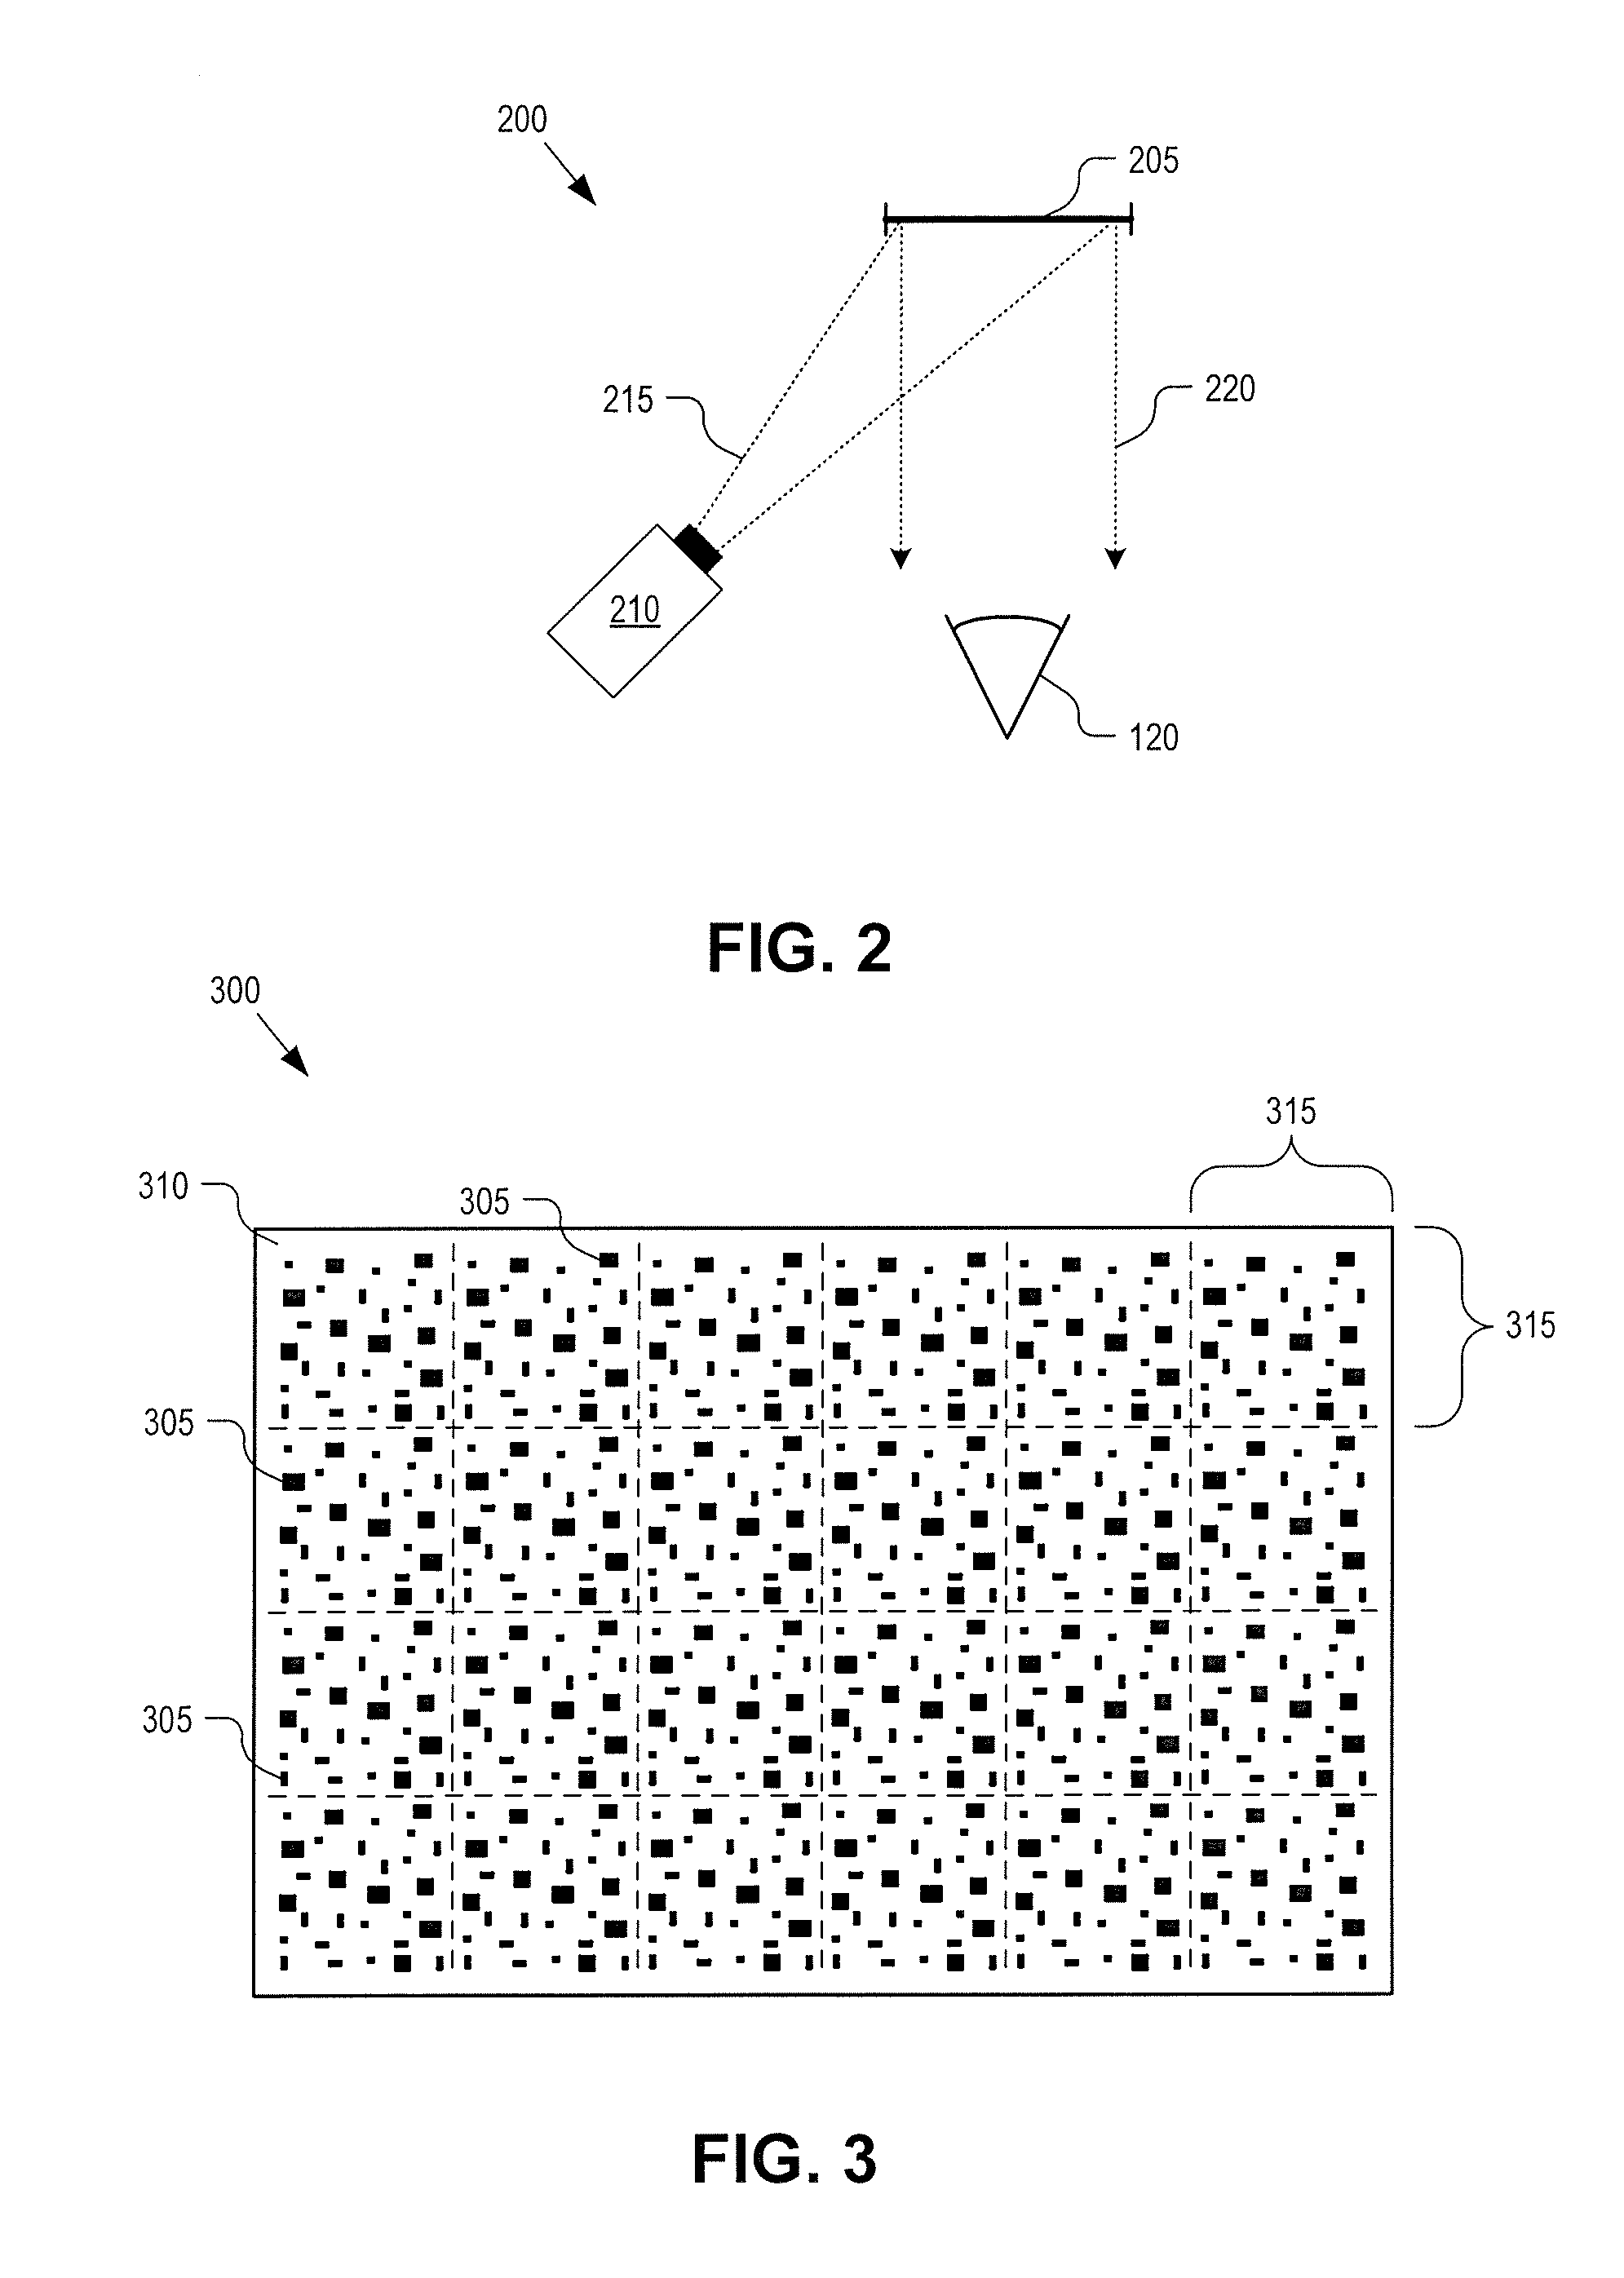 Near-to-eye display with diffraction grating that bends and focuses light